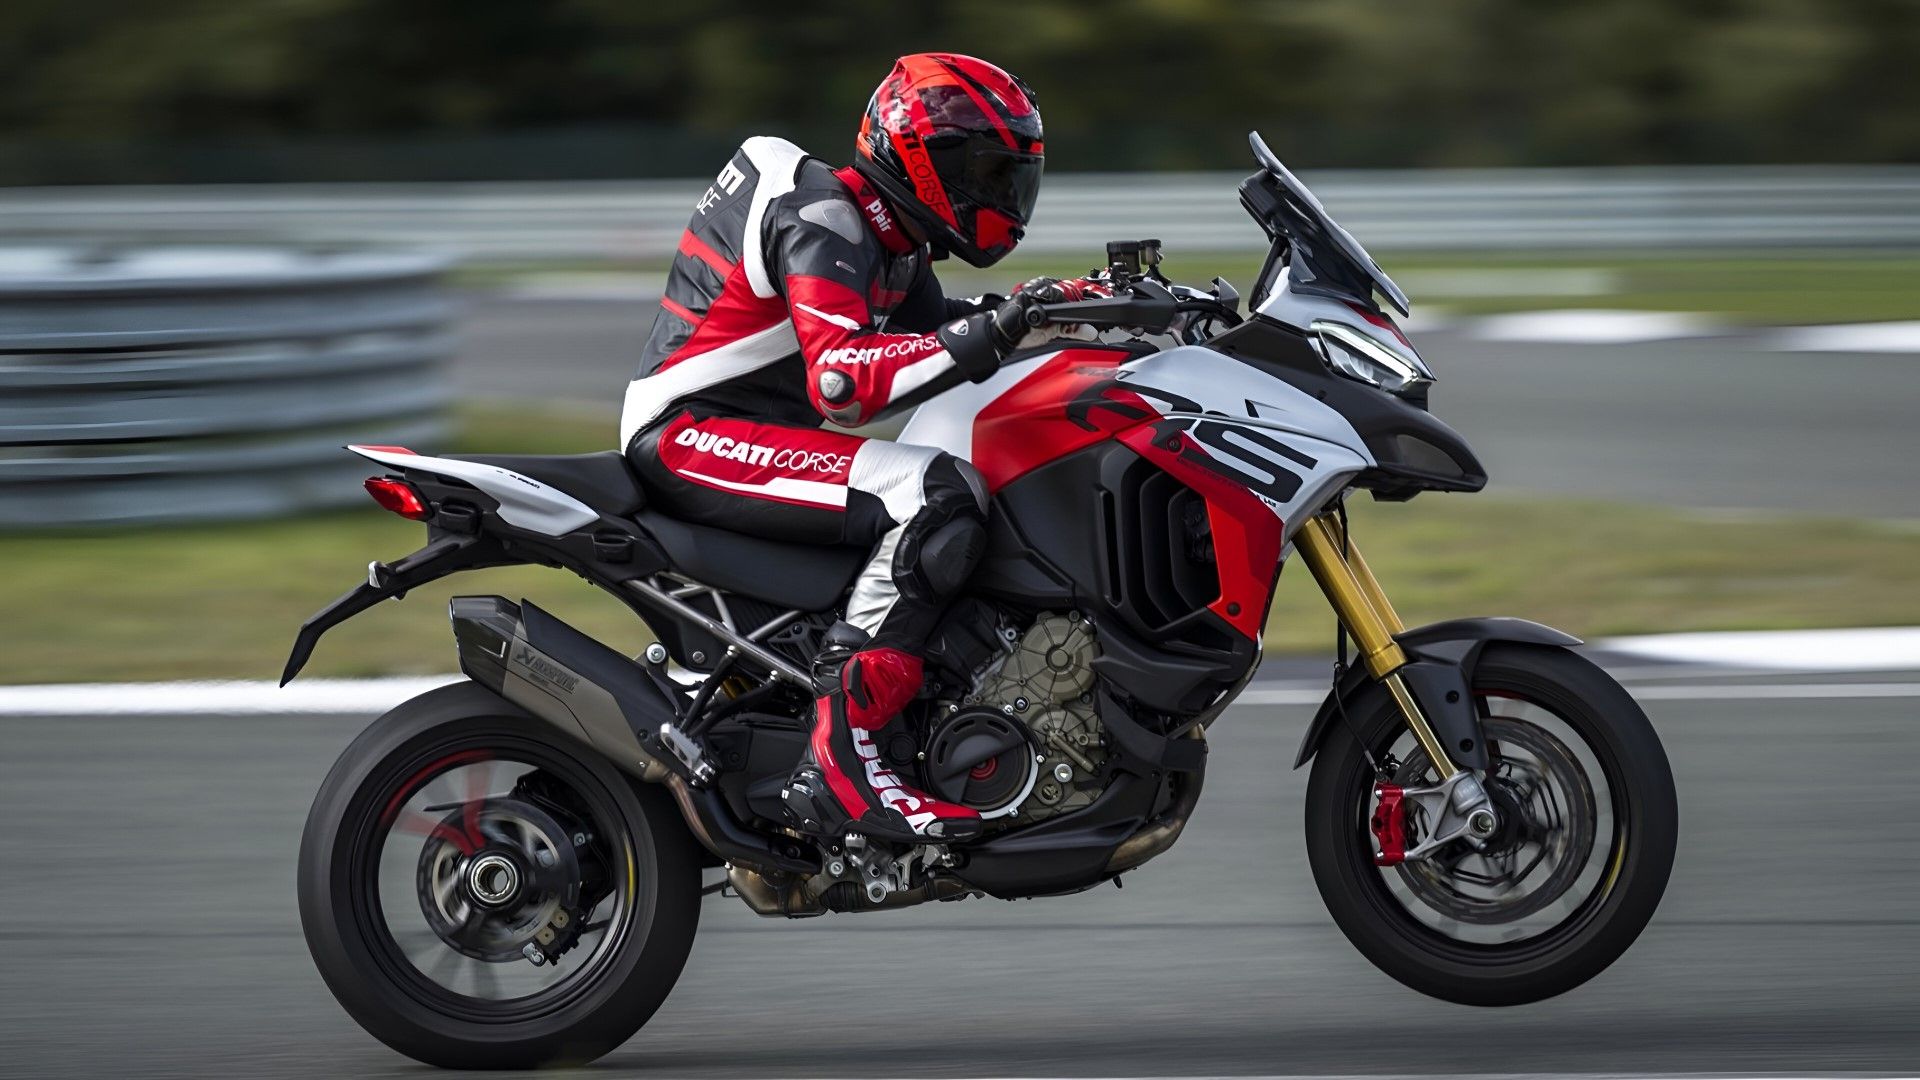 The Most Powerful Adventure Motorcycle From Every Brand, Ranked